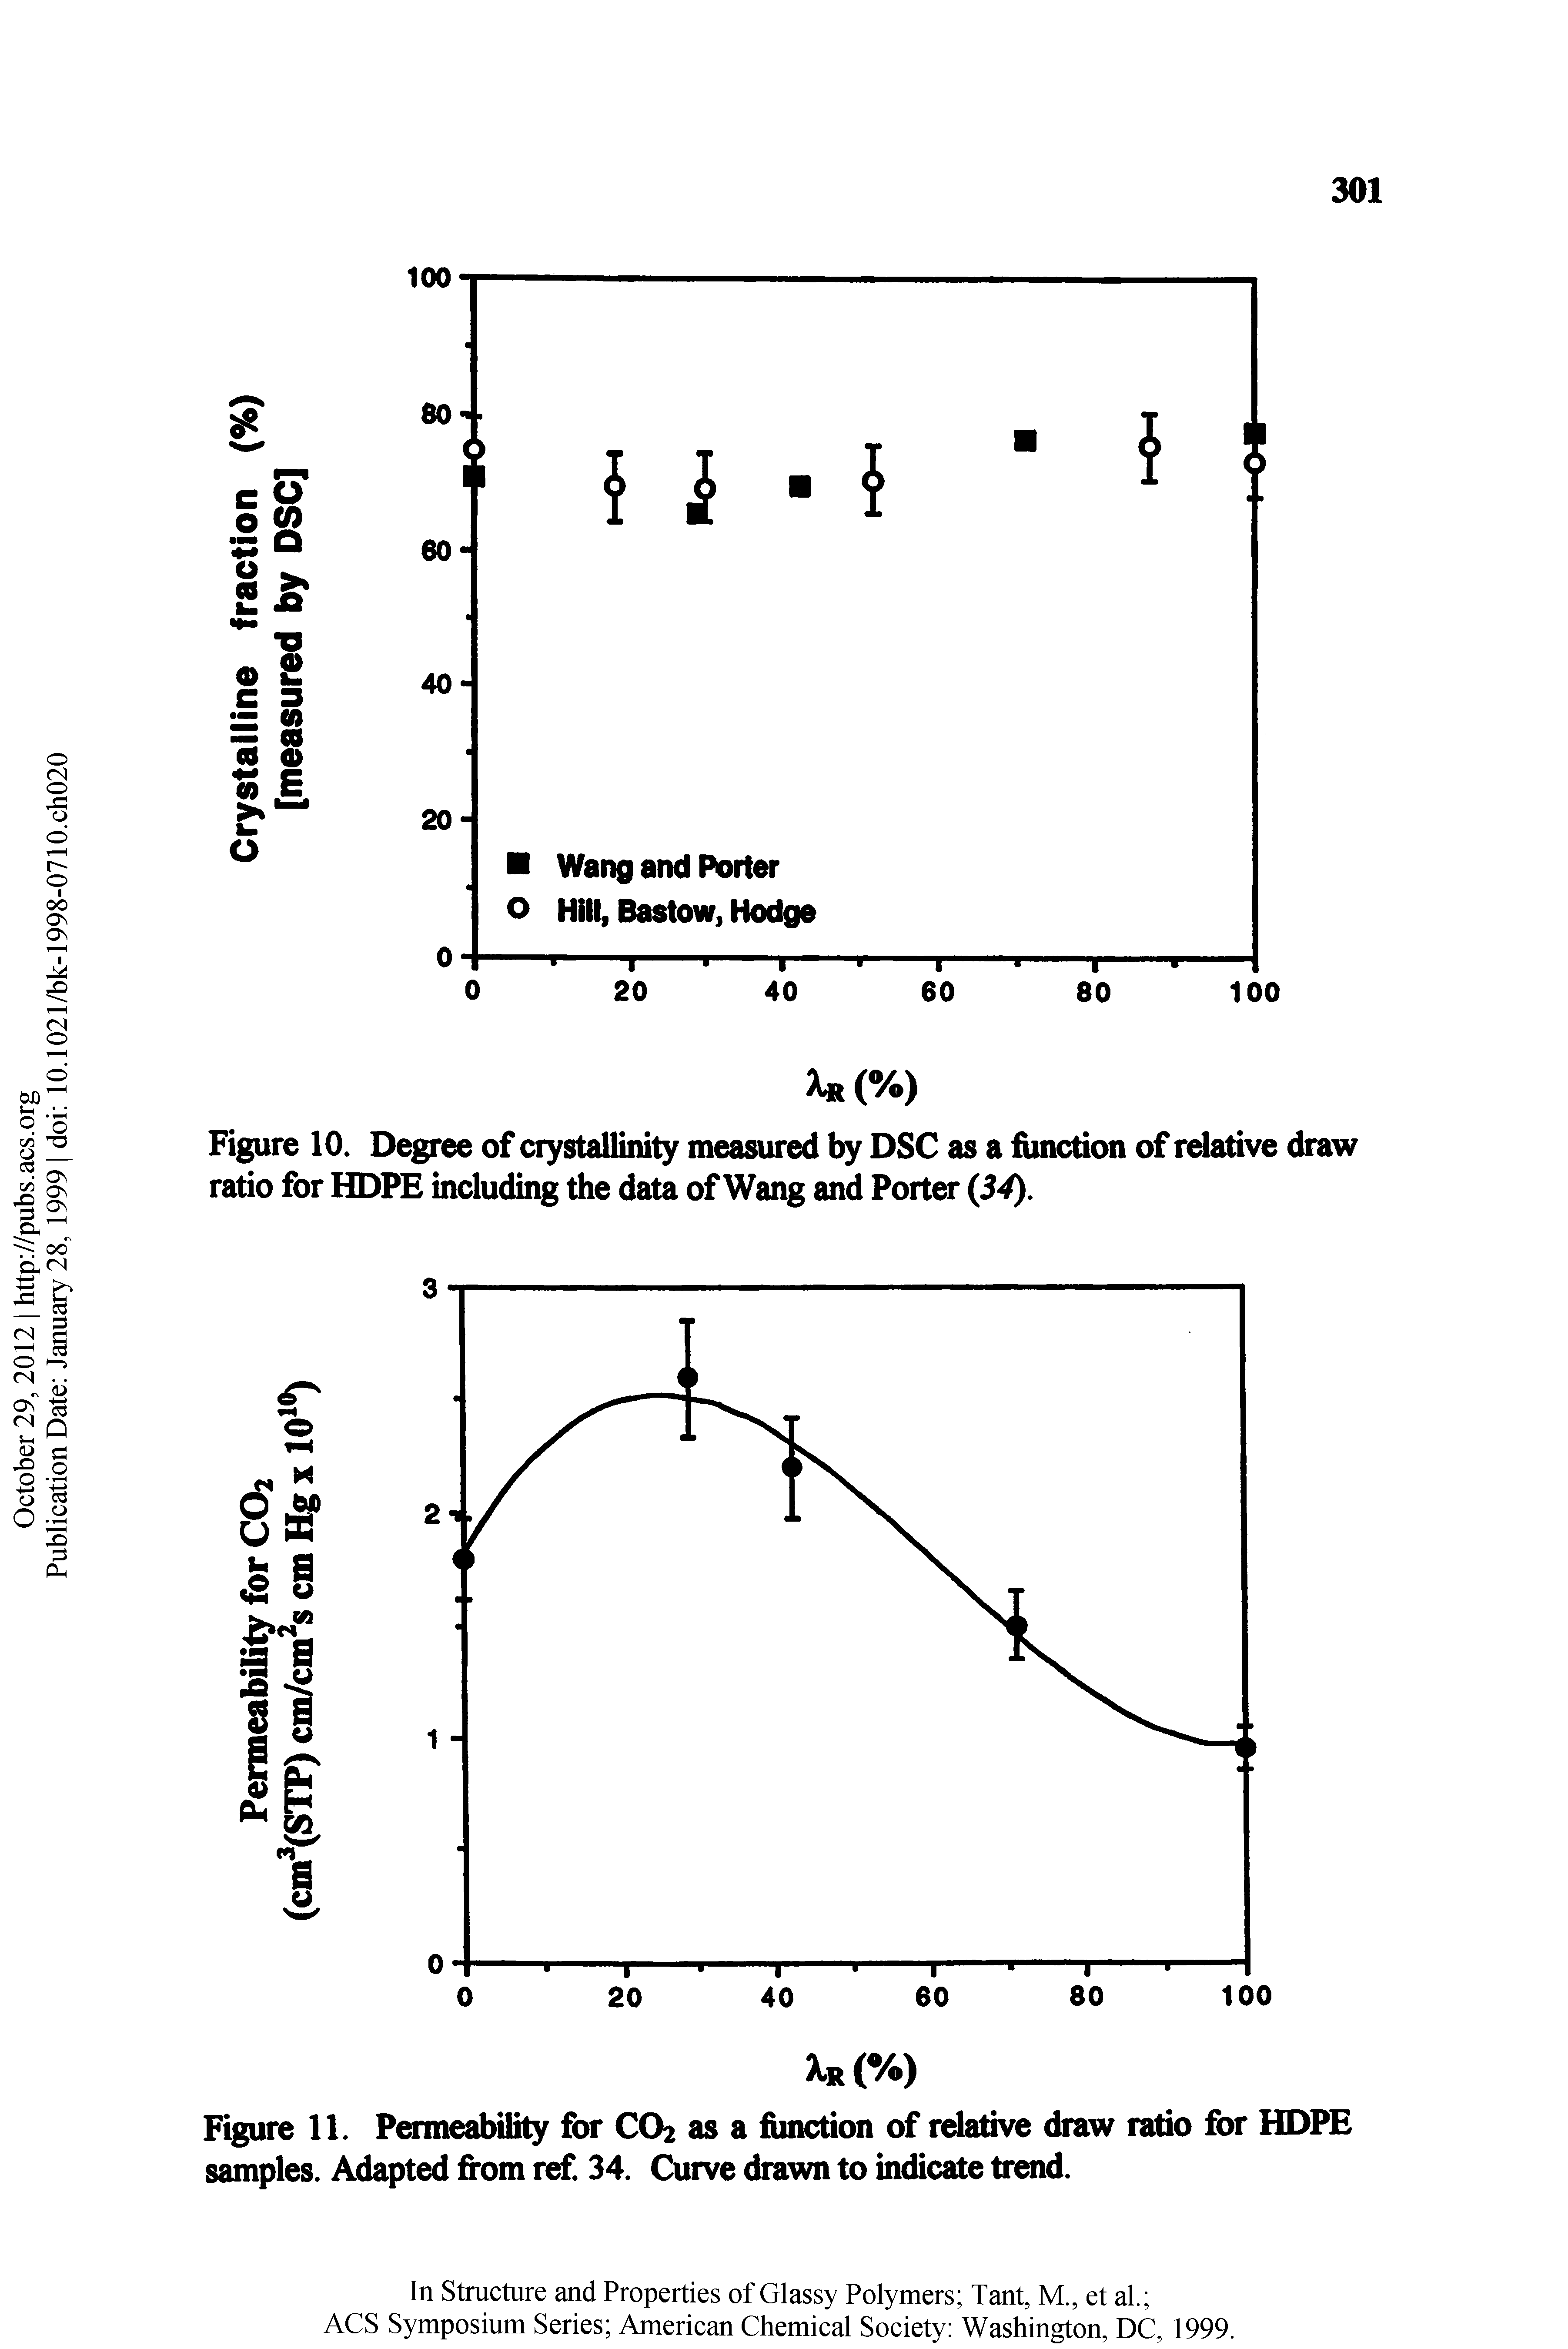 Figure 10. Degree of crystallinity measured by DSC as a fimction of rdative draw ratio for HOPE including the data of Wang and Porter (34).